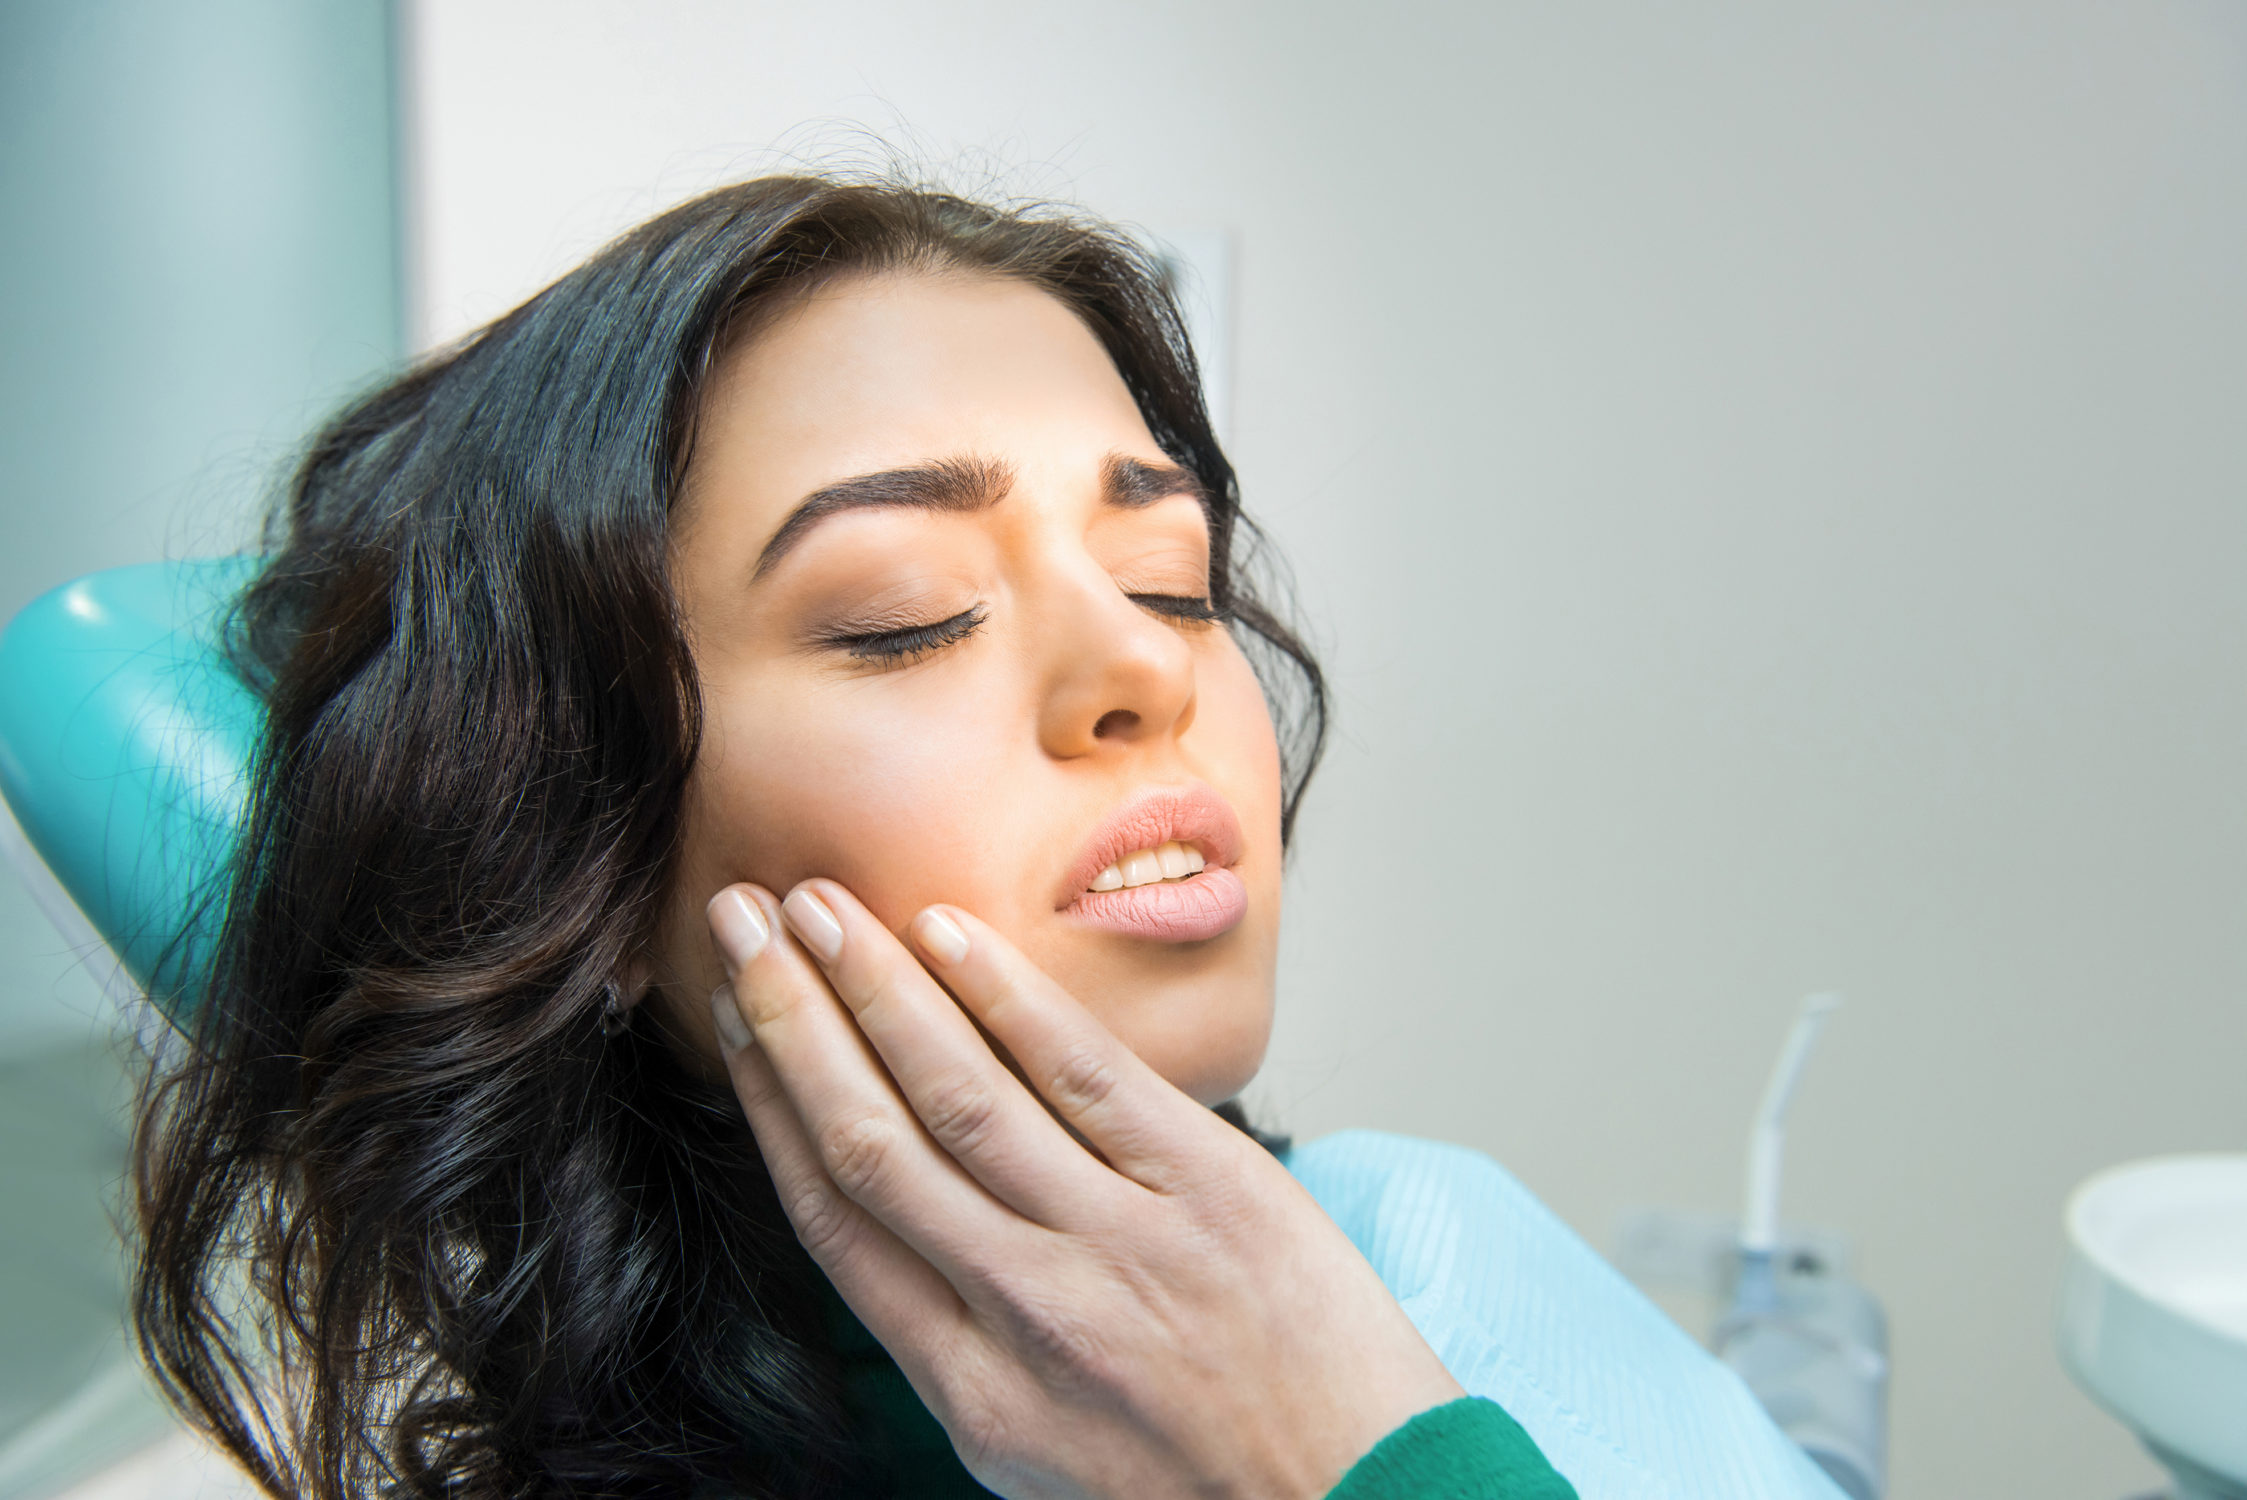 Five Signs of Gum Disease and How to Address Them